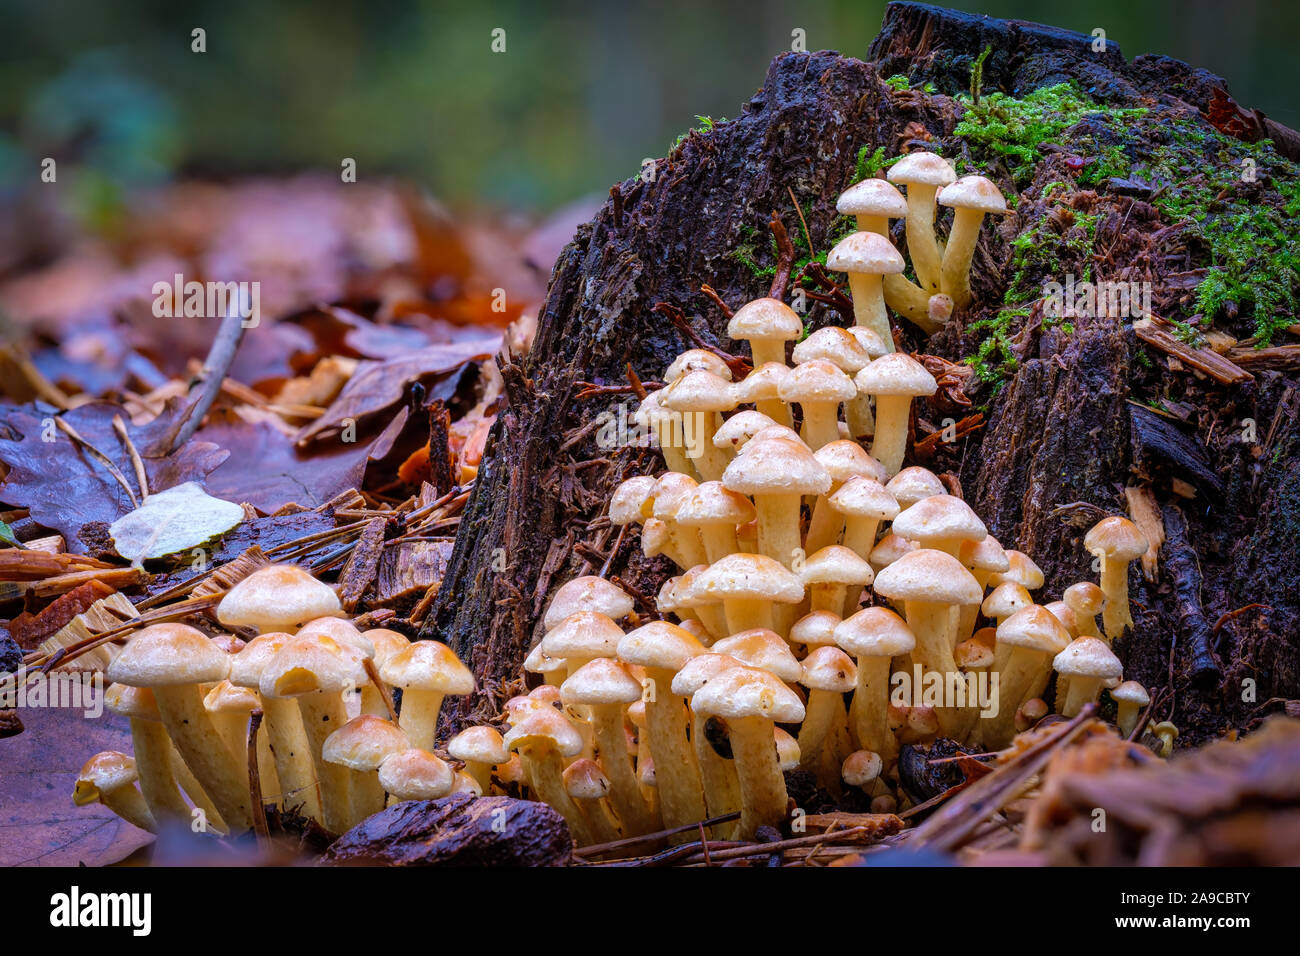 Small mushroom village in front of an old tree stump Stock Photo